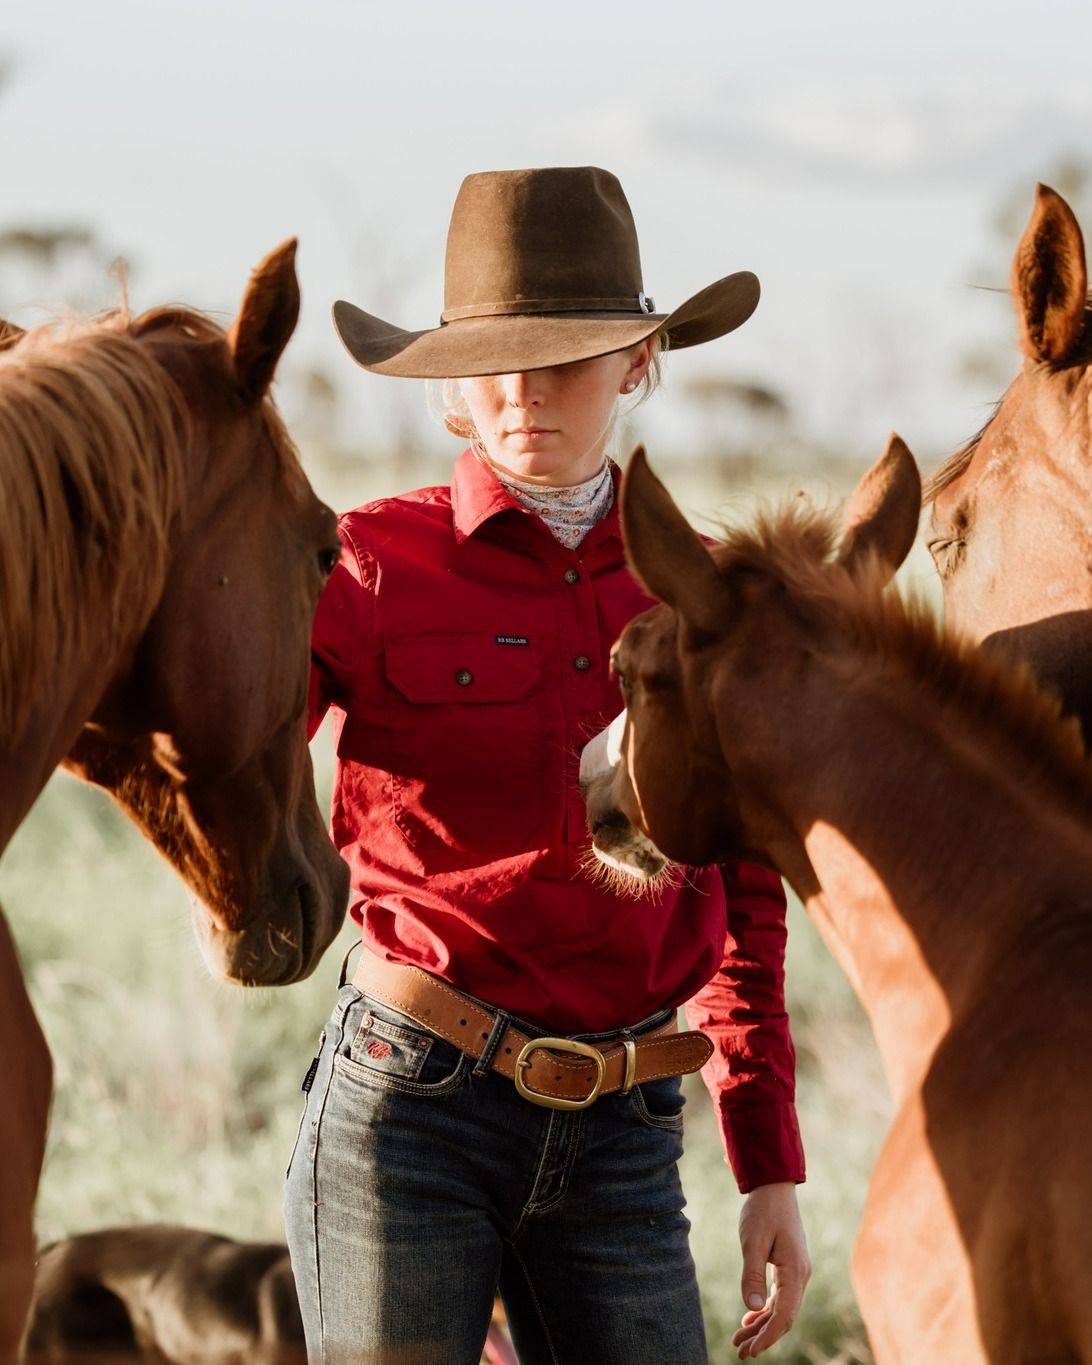 The Sandy Workshirt 

A long-wearing shirt for women of all ag...

Shop the range via the link in bio.

#RBSellars